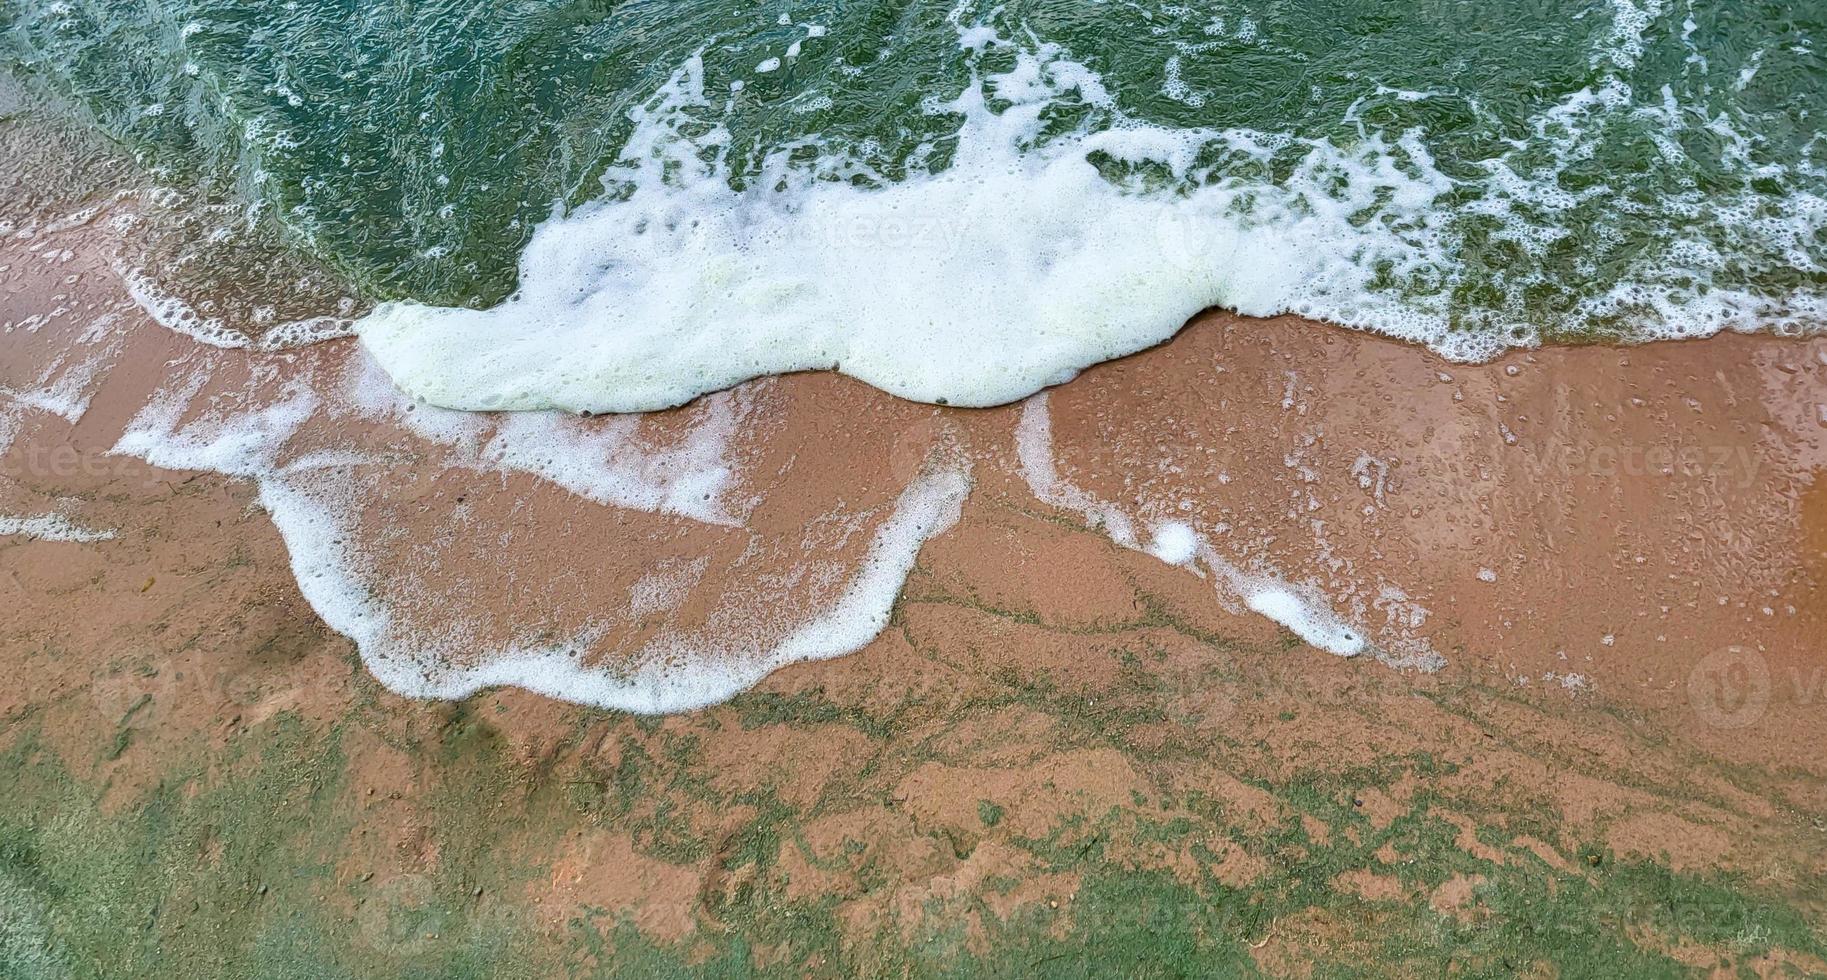 Foam waves and sand.Emerald waves from algae on a windy day photo